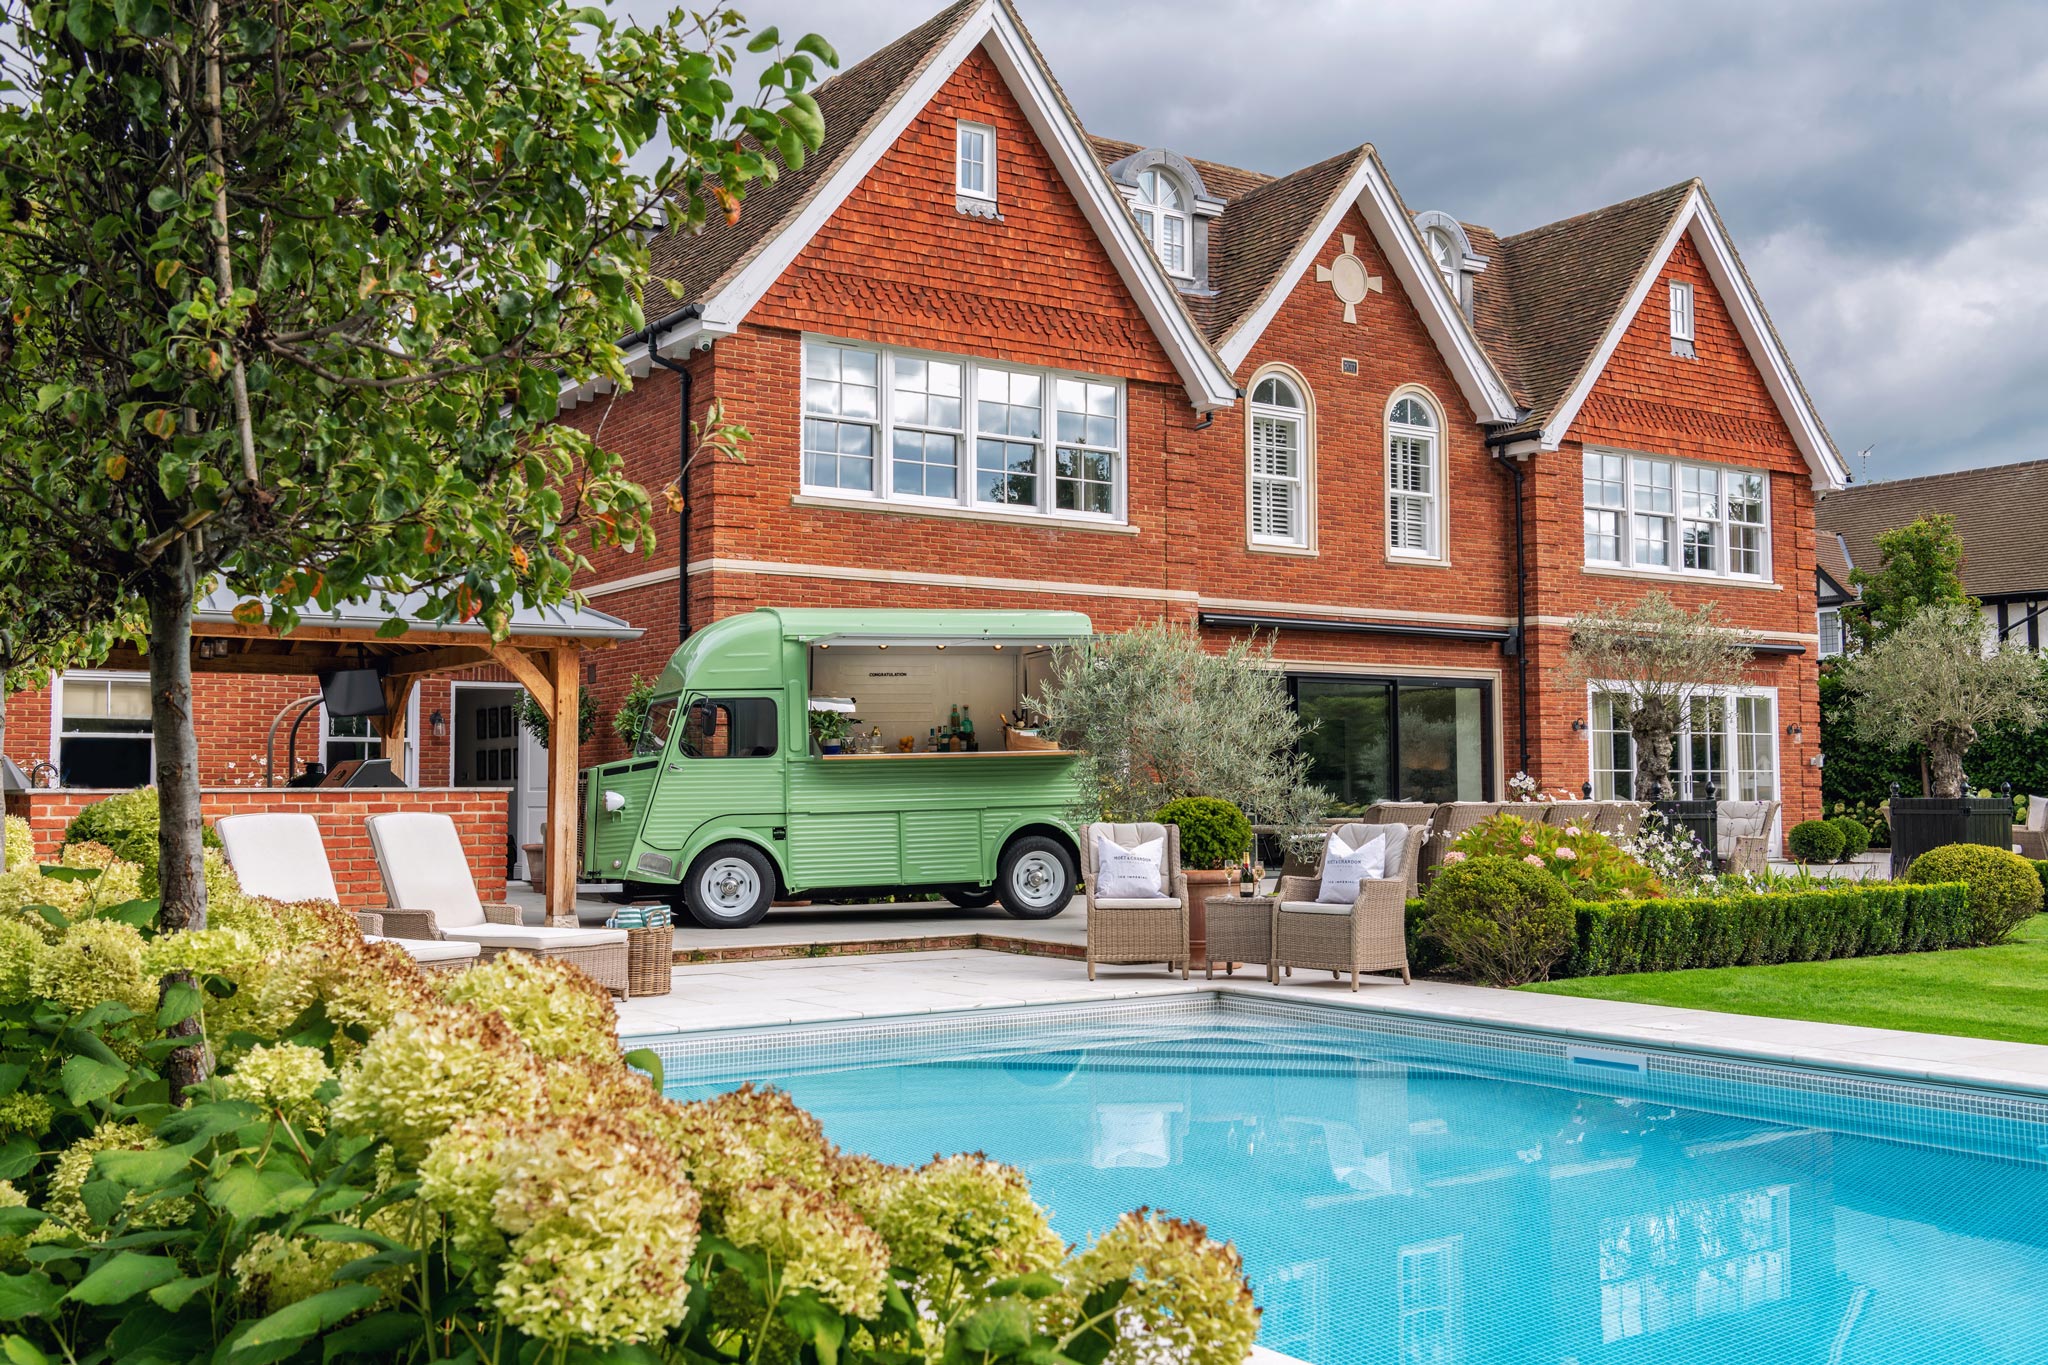 Vintage van parked next to a sparkling swimming pool surrounded by a lush garden. The beautiful home in the background adds a touch of luxury to the idyllic outdoor setting. Perfect for a summer getaway or a staycation in style.